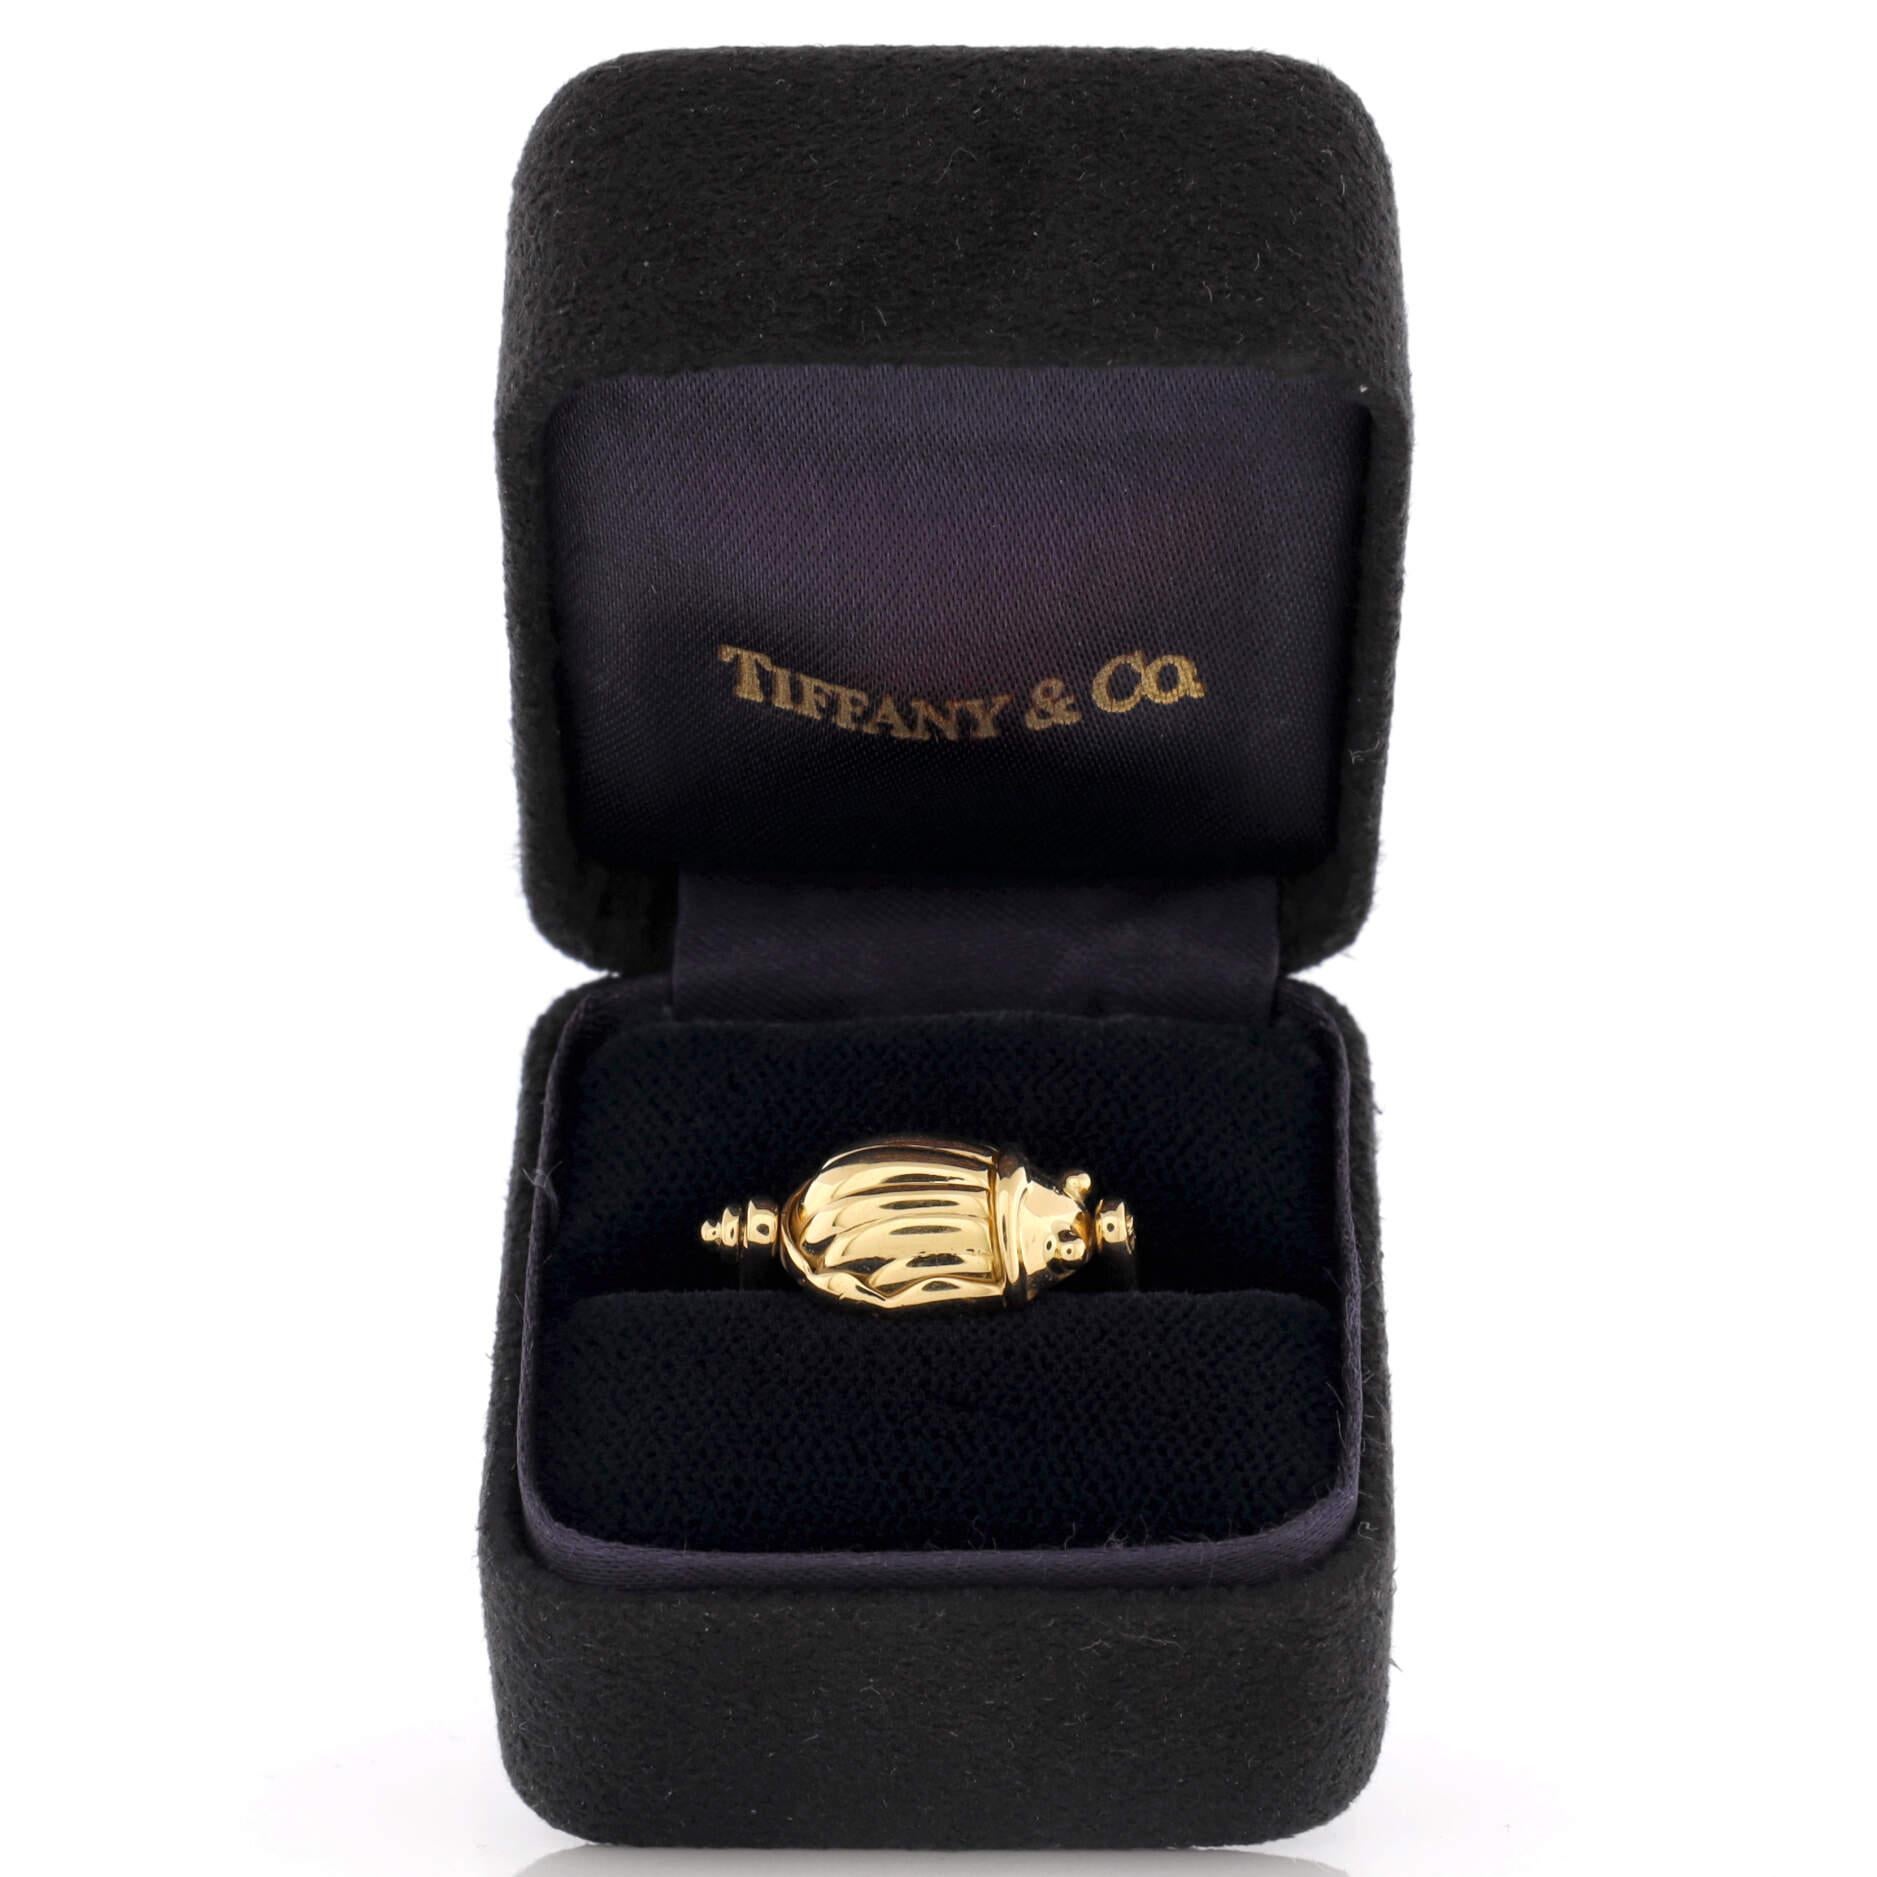 Condition: Good. Moderately heavy wear throughout commensurate with age.
Accessories: No Accessories
Measurements: Size: 7.5, Width: 2.35 mm
Designer: Tiffany & Co.
Model: Scarab Ring 18K Yellow Gold
Exterior Color: Yellow Gold
Item Number: 216744/5